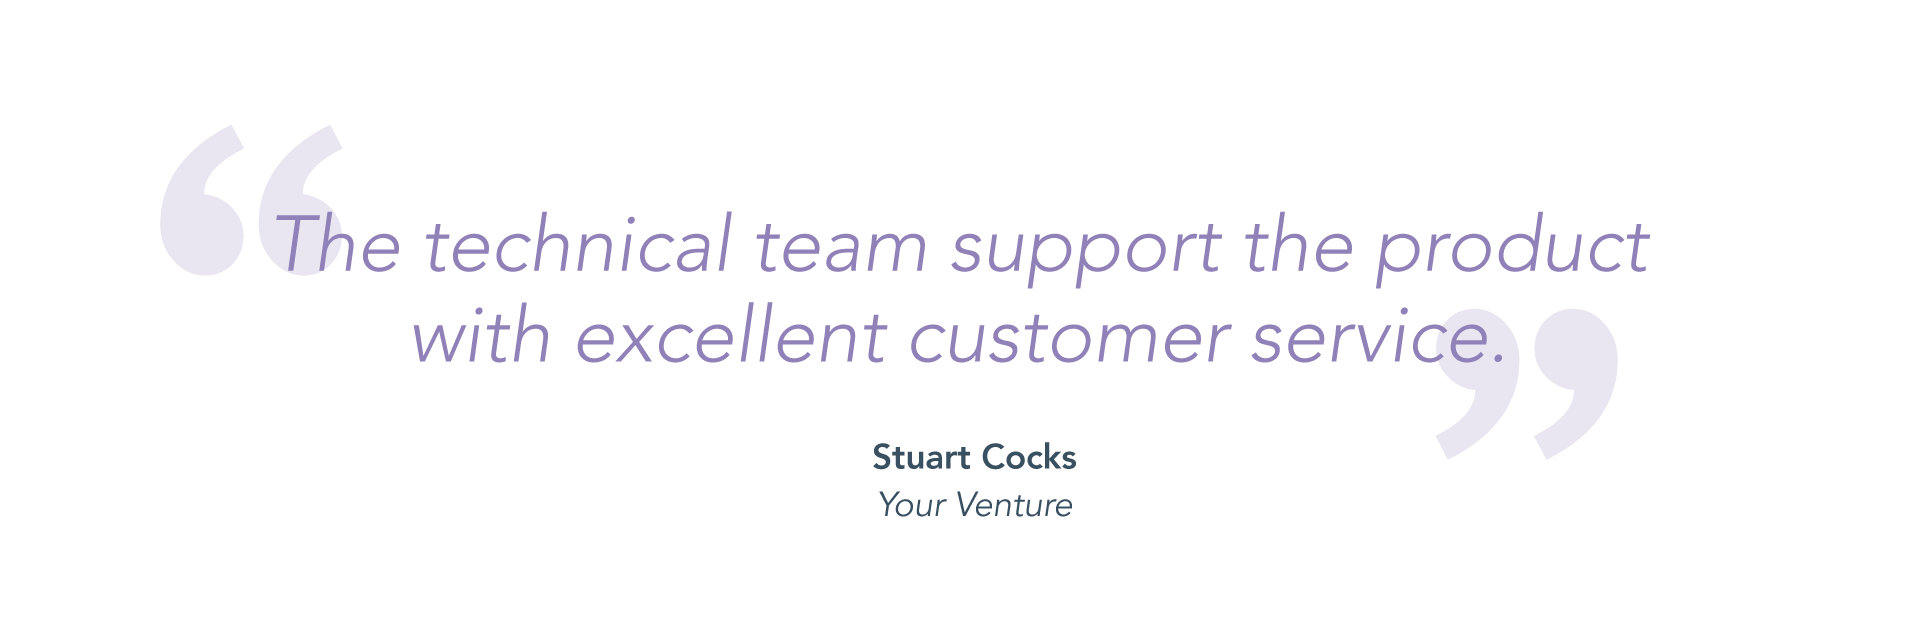 "The technical team support the product with excellent customer service." - Stuart Cocks, Your Venture.